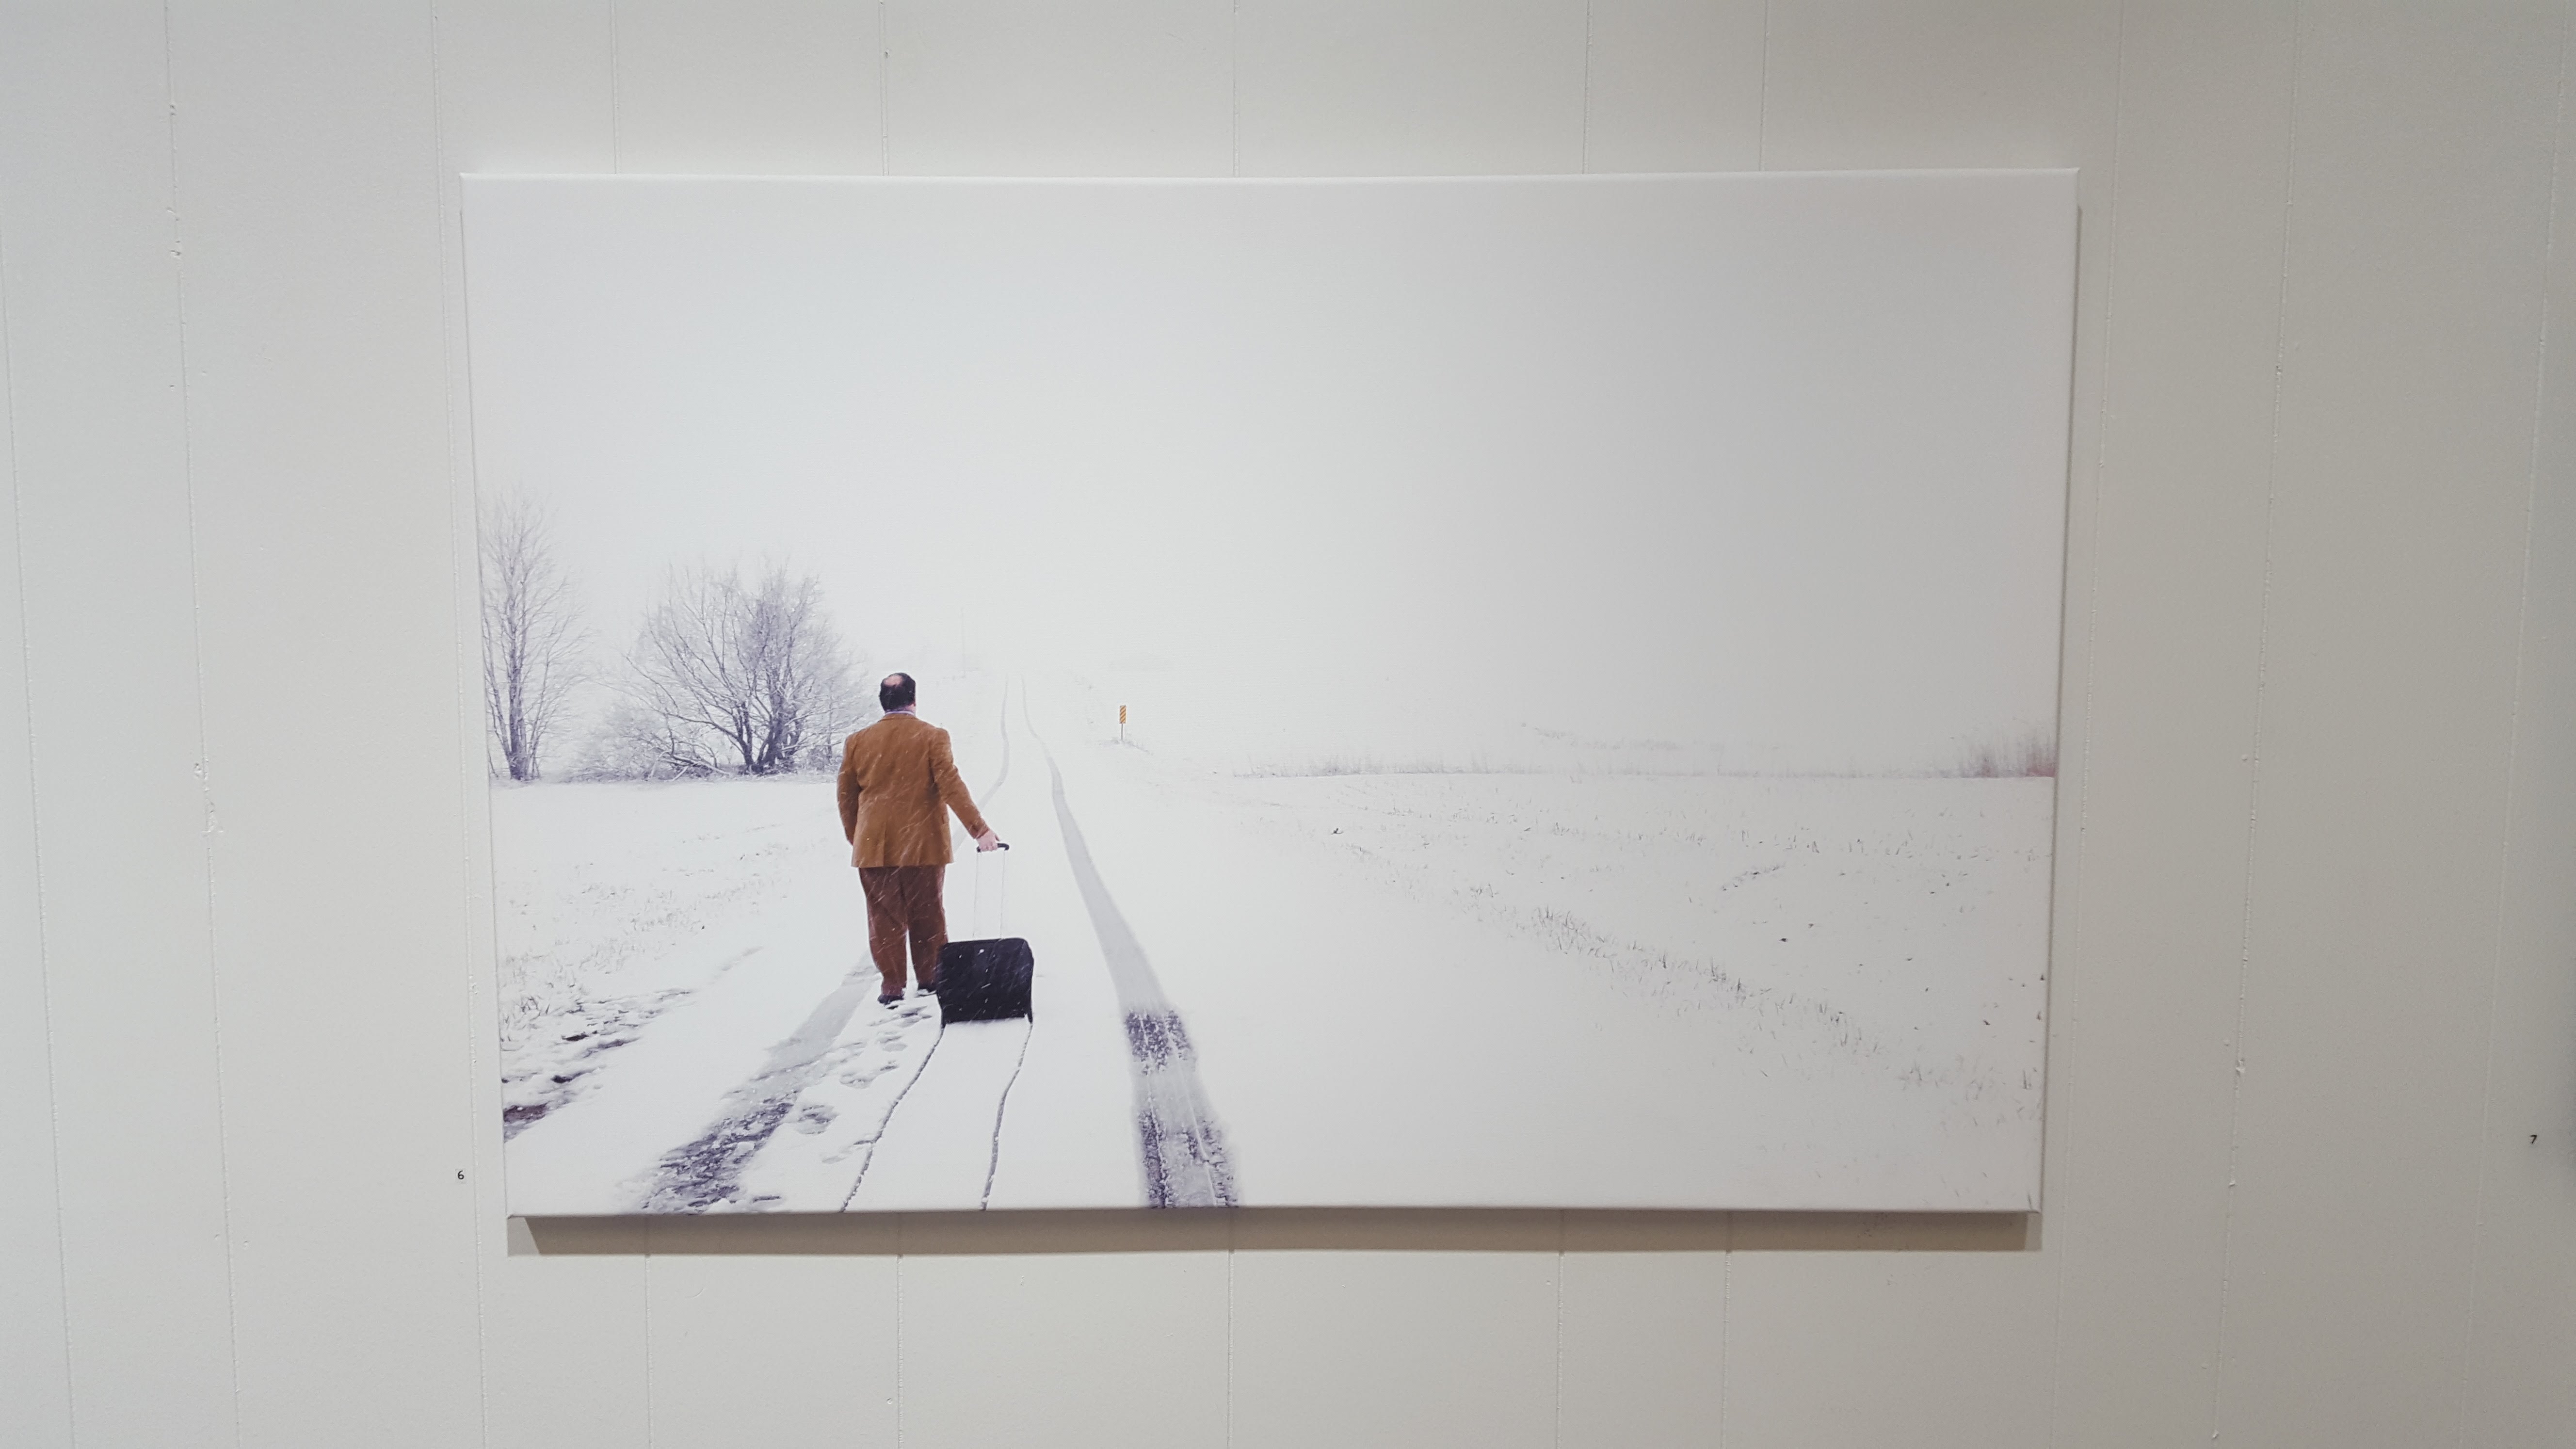 The artist is strolling down a snow covered road in business casual attire, pulling his suitcase behind him. Photo by Ted Diamond. Image courtesy of Edward Breitweiser.